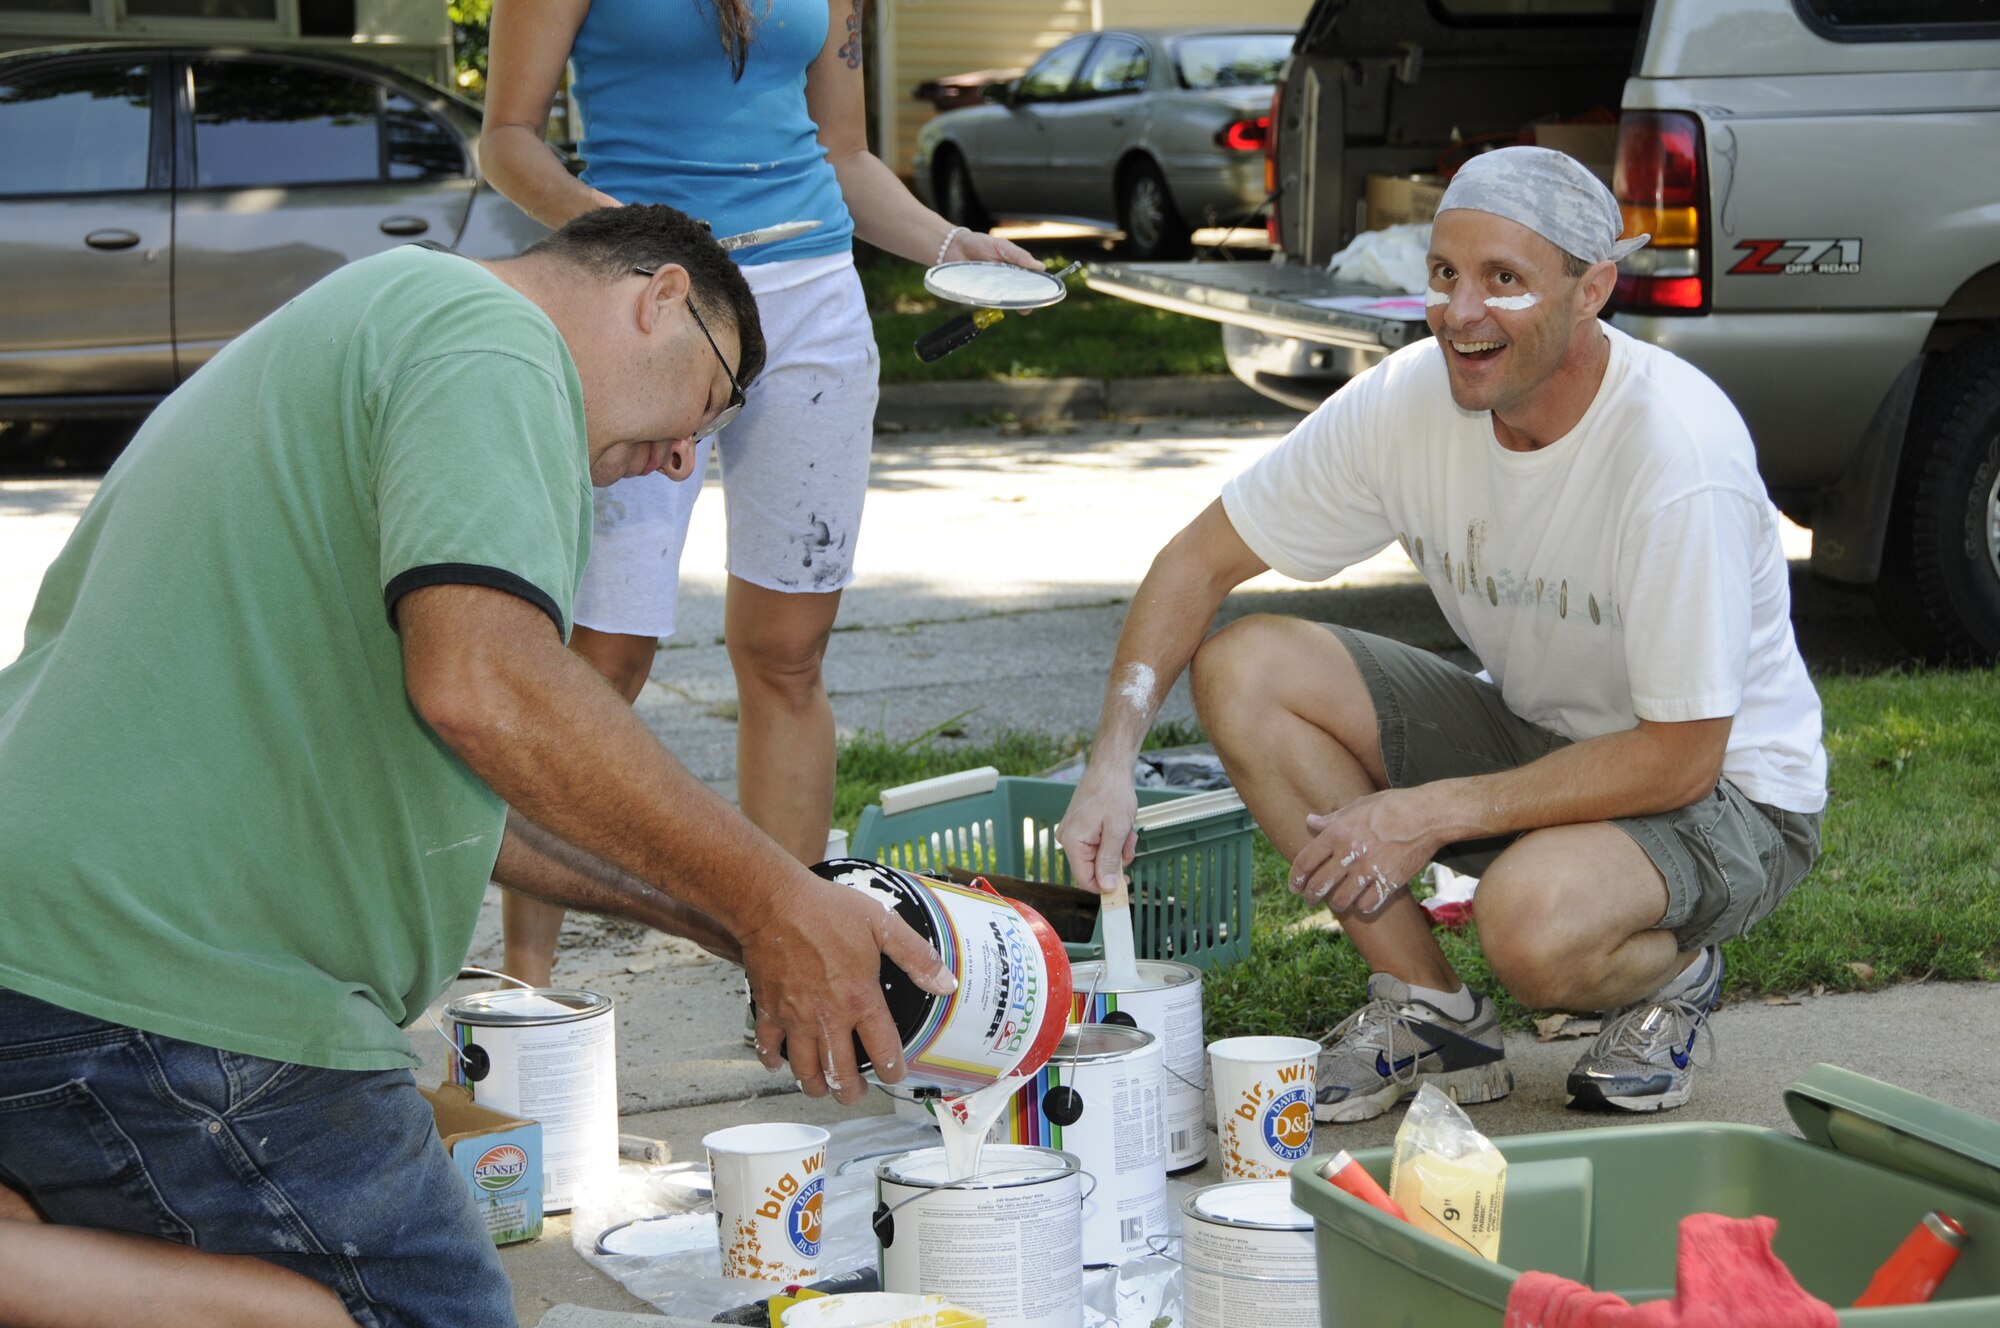 Chief Master Sgt. Douglas E. Schulz and Senior Master Sgt. Stuart P. Stofferahn pour and stir the paint used during the Lincoln Paint-a-thon in Lincoln, Neb. on Aug. 13, 2011. Schulz and Stofferahn coordinated the event and recruited volunteers.  (Nebraska Air National Guard photo by Master Sergeant Vern Moore) (Released)